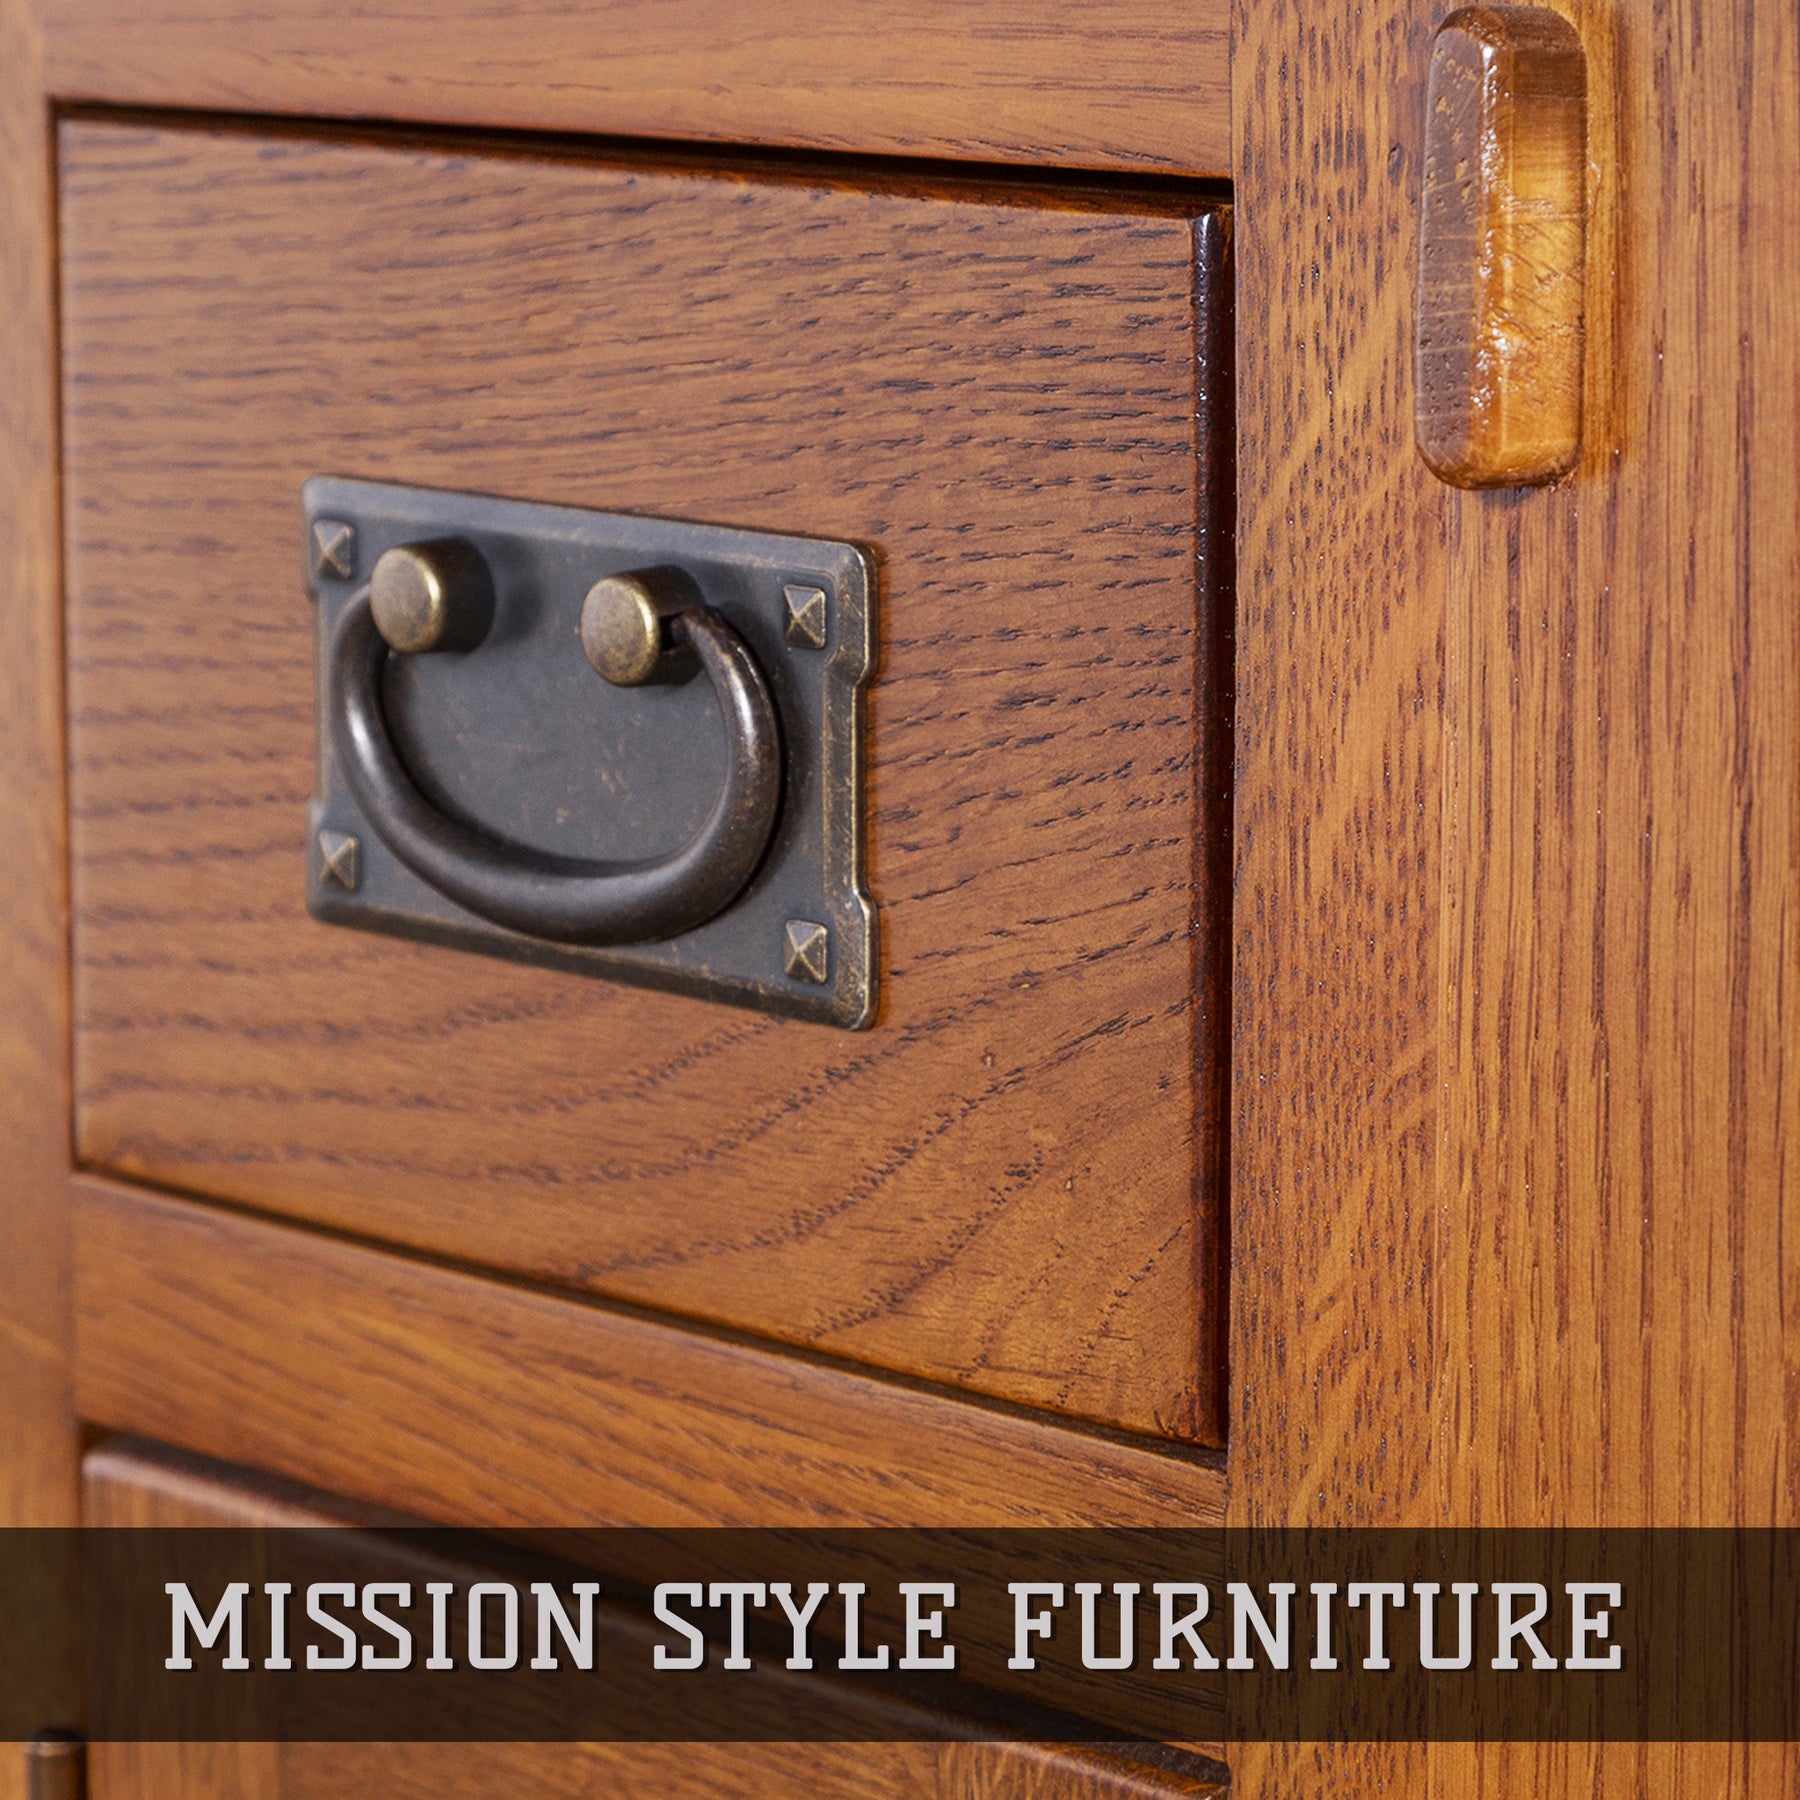 Facts About Mission Style Furniture